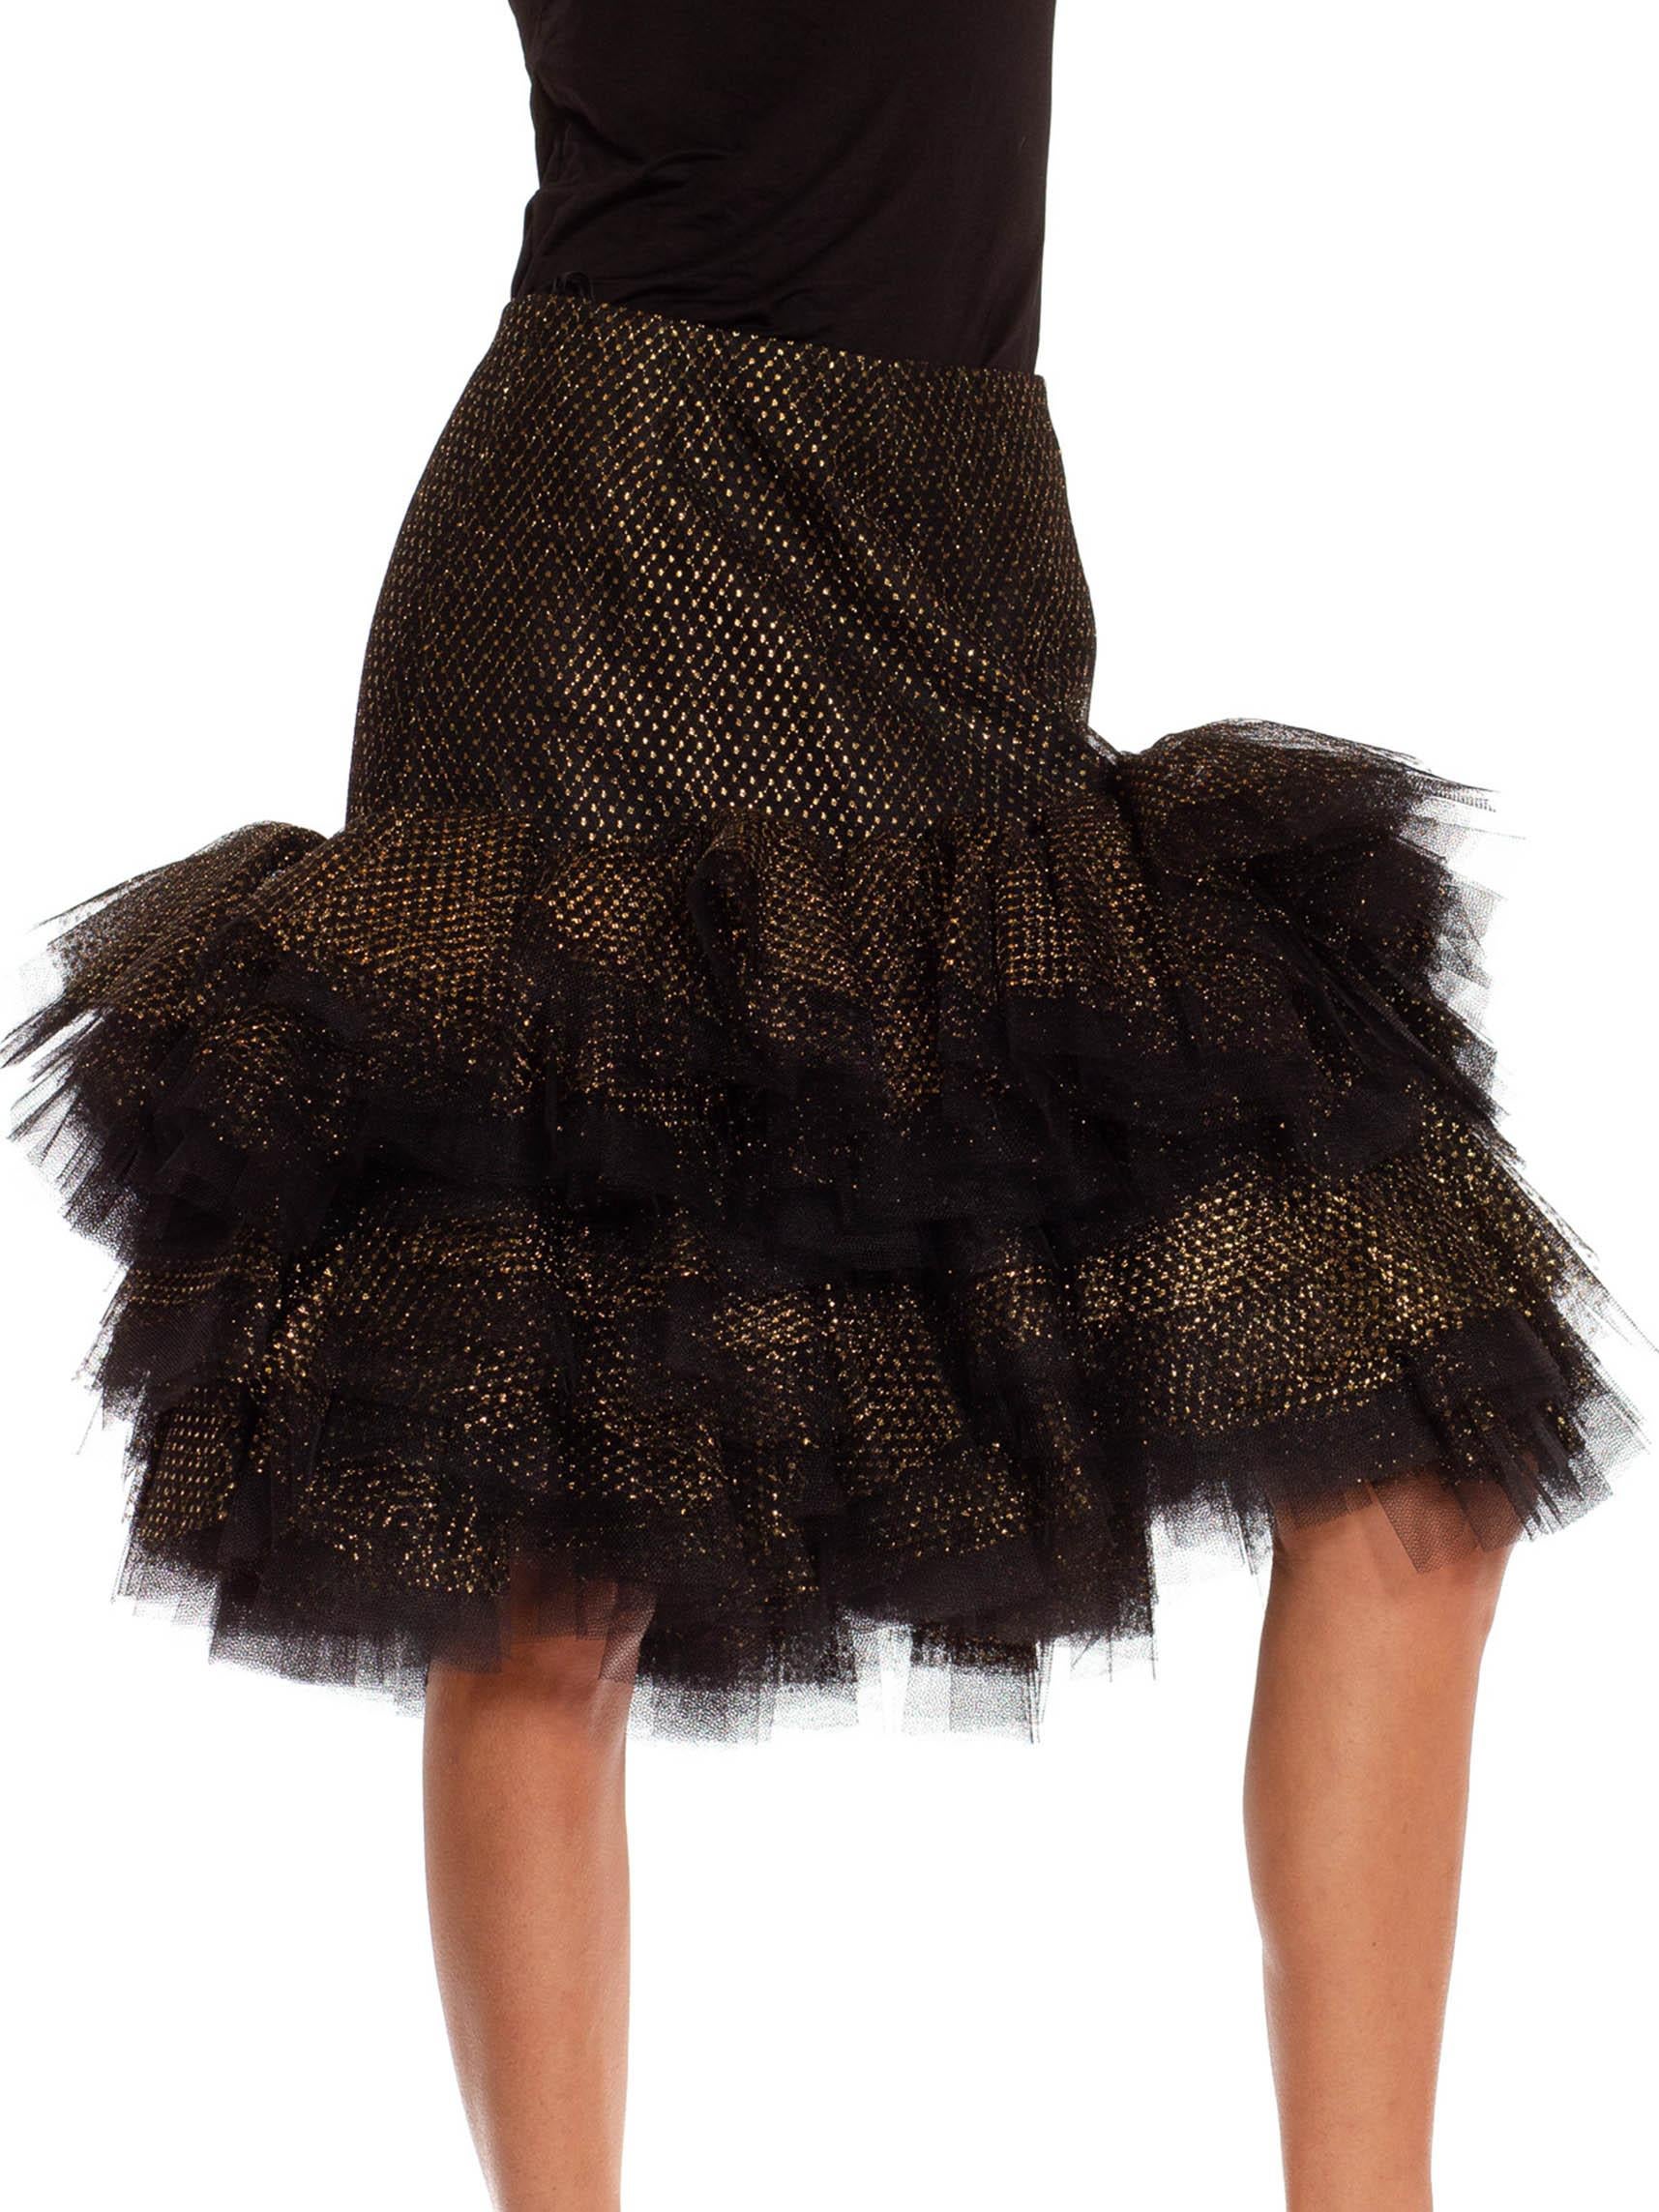 1980S Jacqueline De Ribes Black & Gold Tulle Tiered Polka Dot Skirt For Sale 2